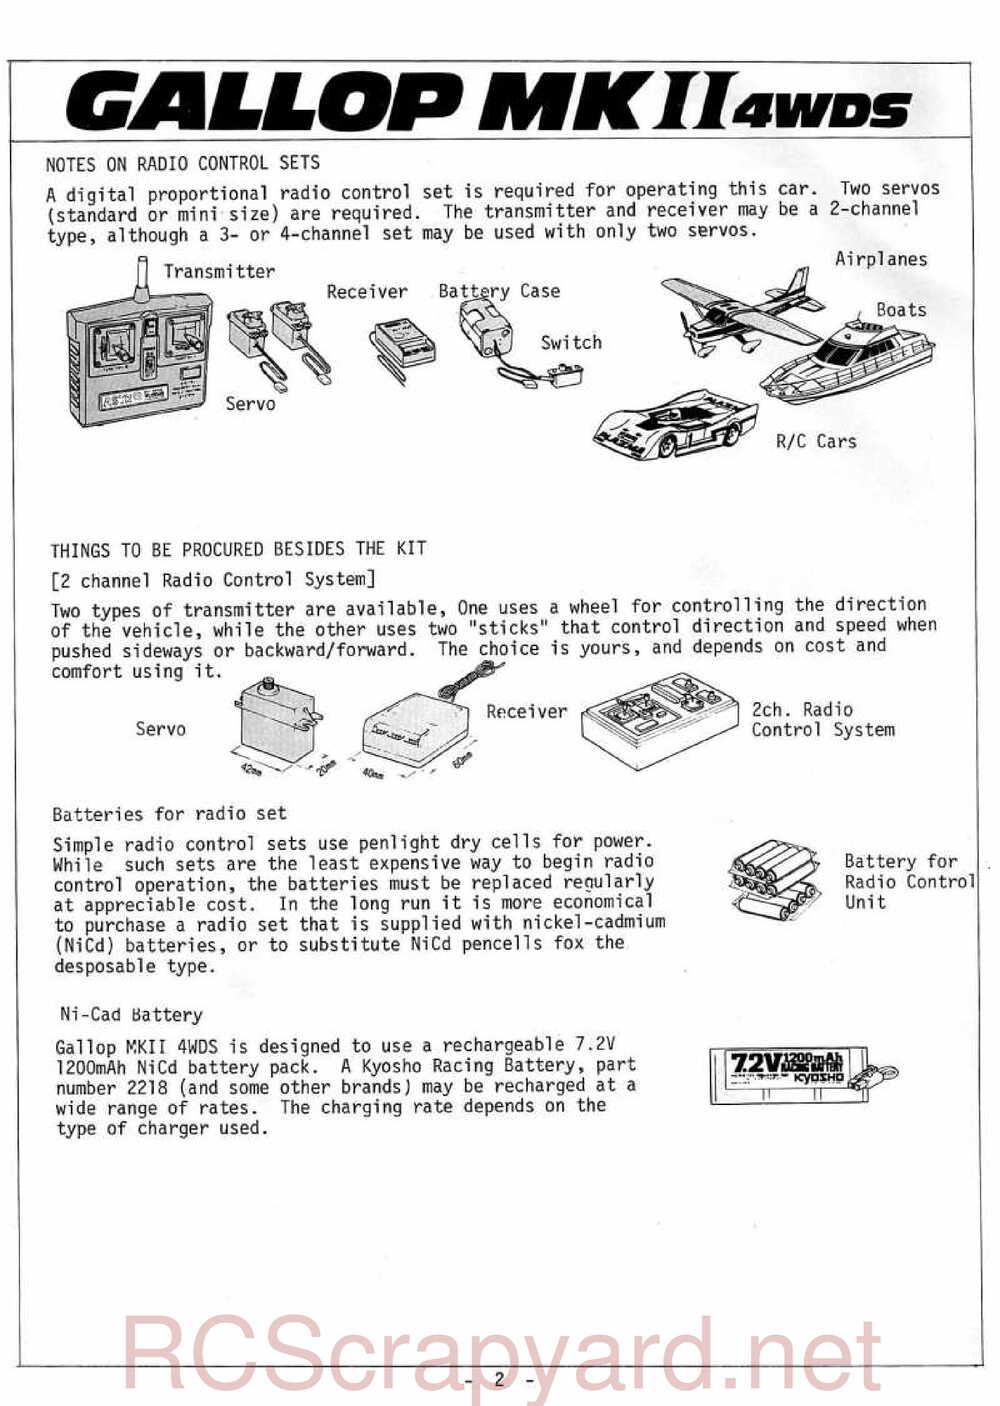 Kyosho - 3069 - Gallop MkII - Manual - Page 02